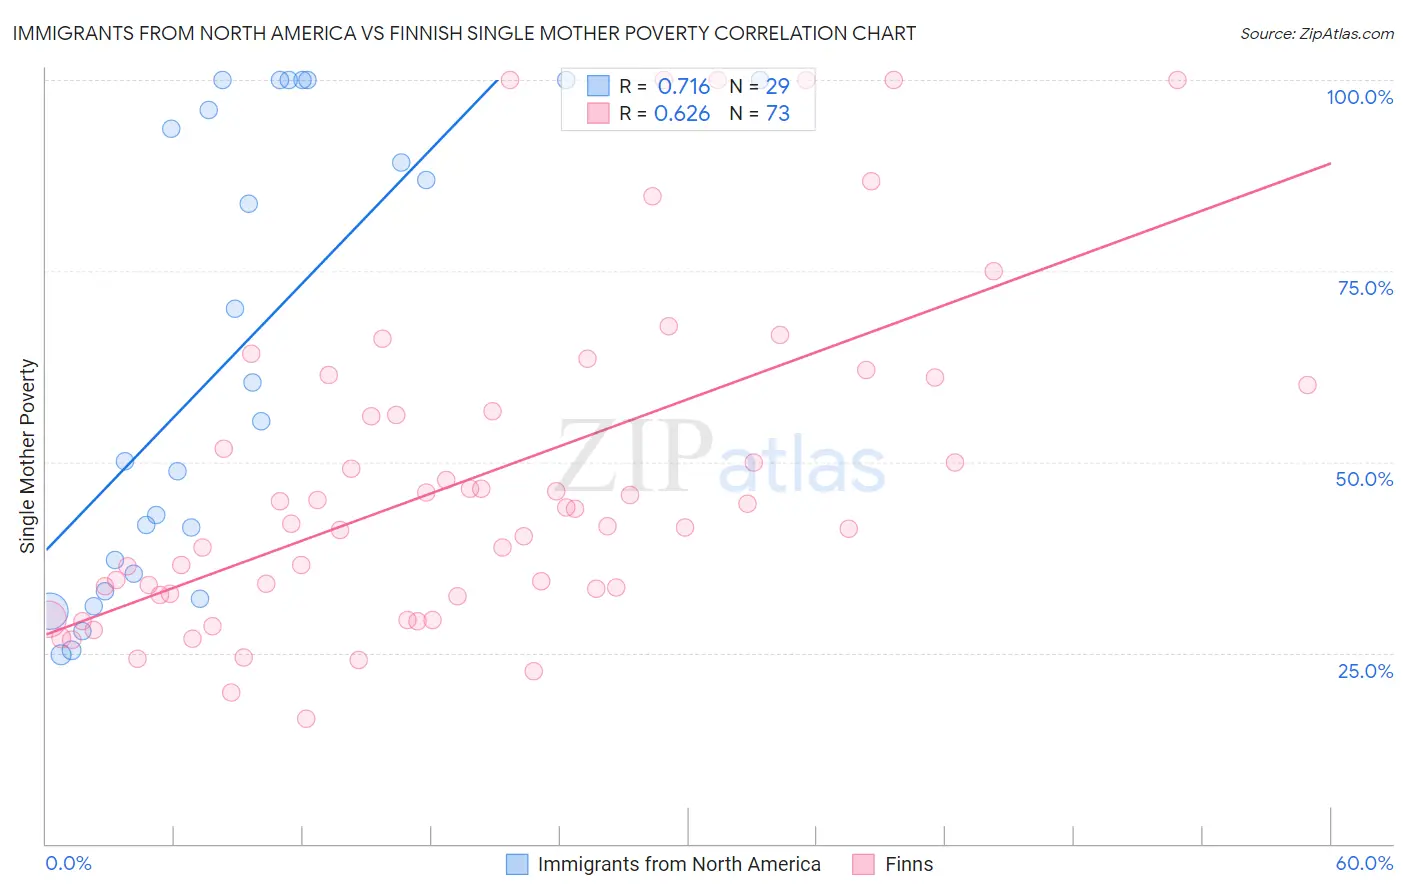 Immigrants from North America vs Finnish Single Mother Poverty